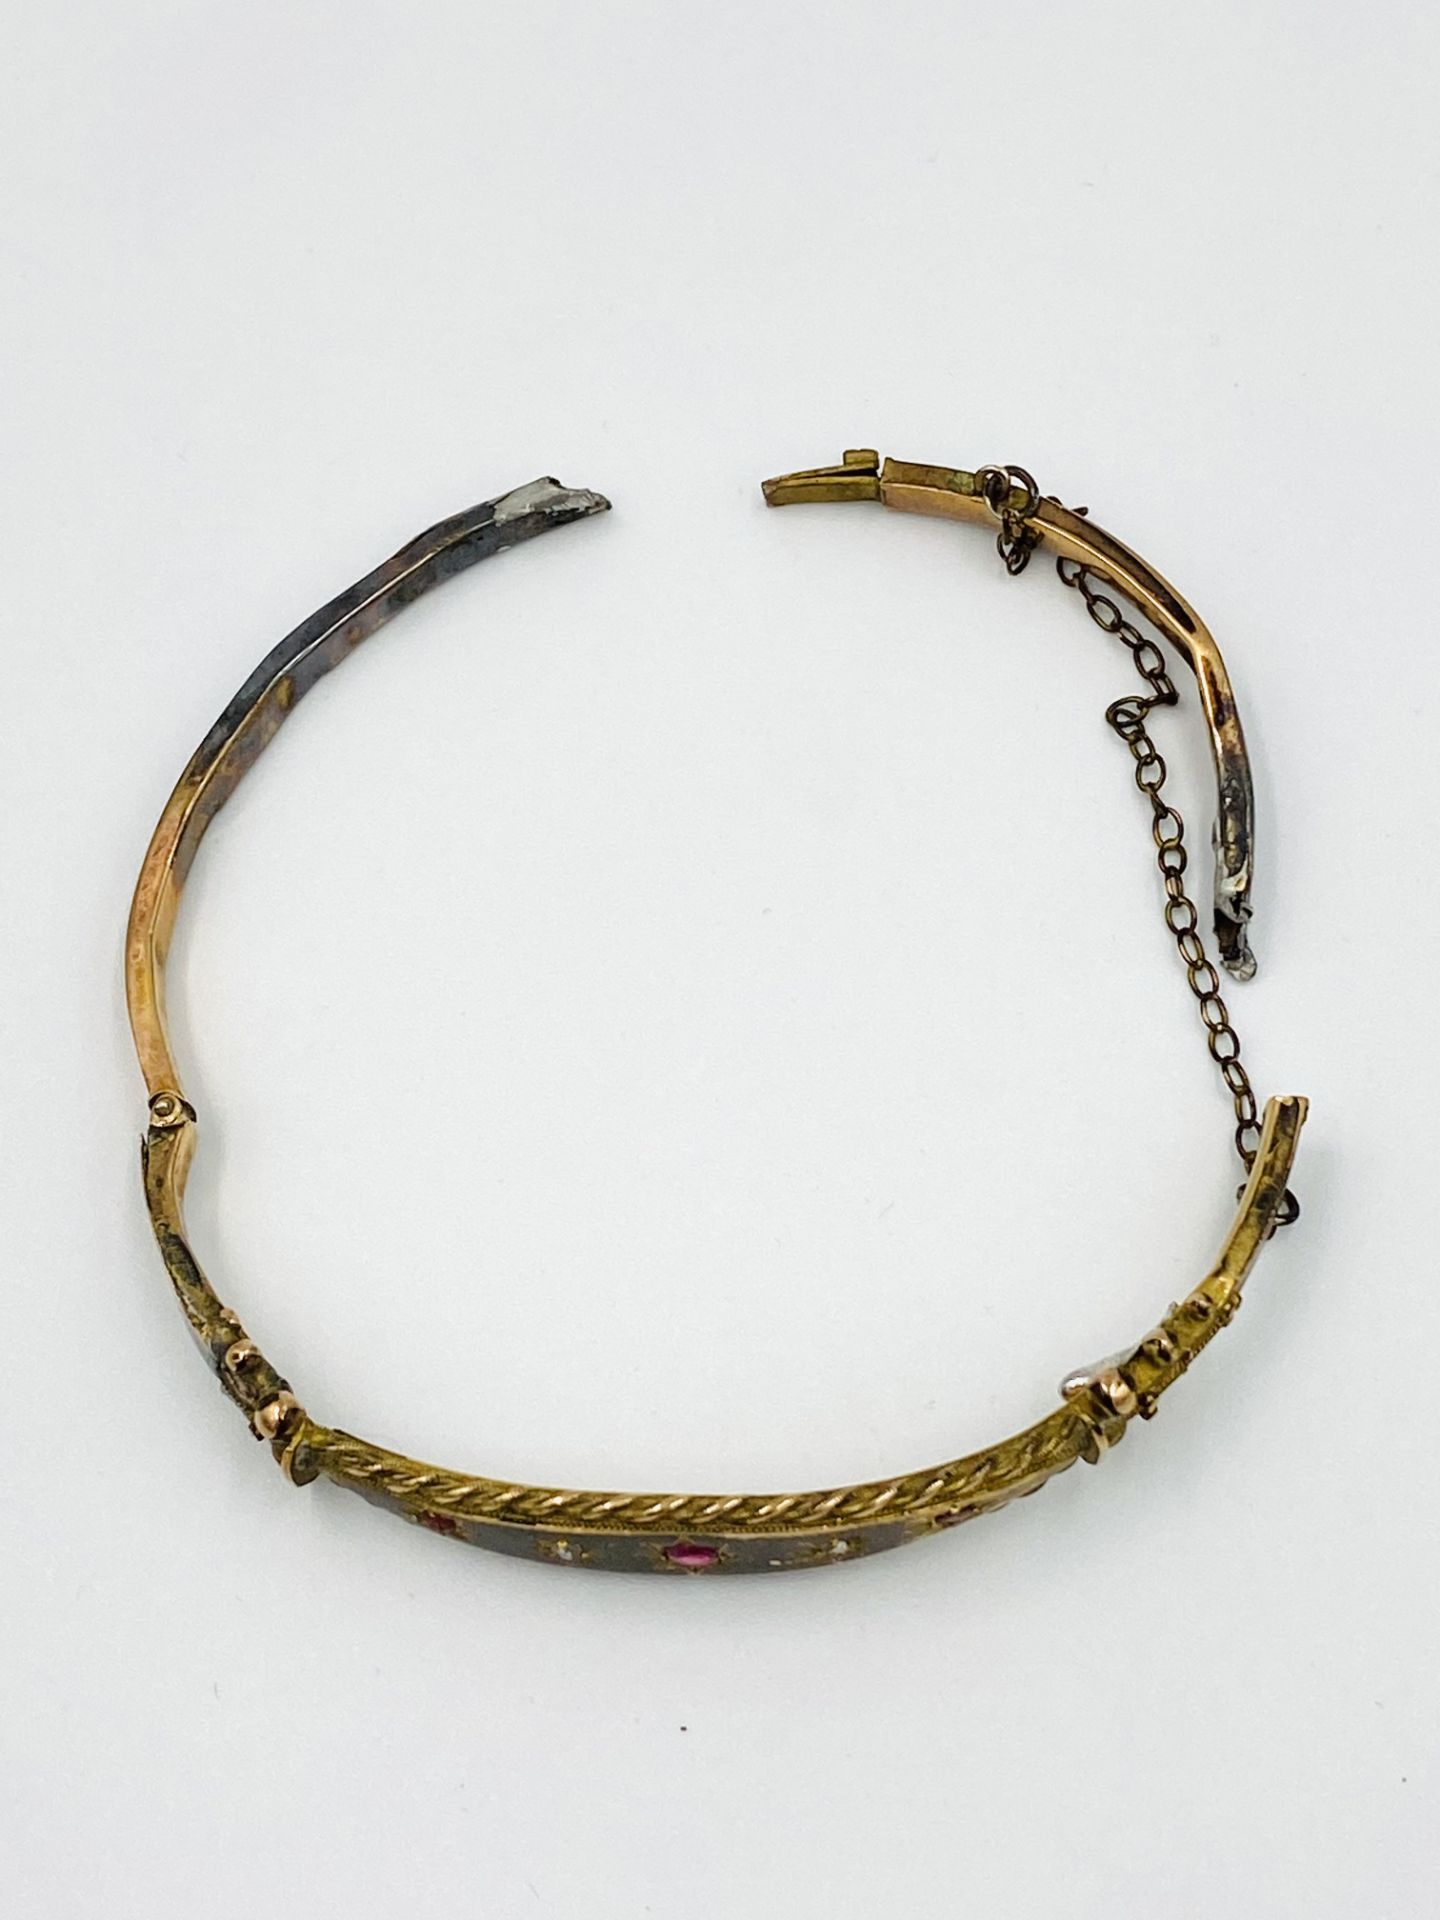 9ct gold bracelet (as found) - Image 2 of 3